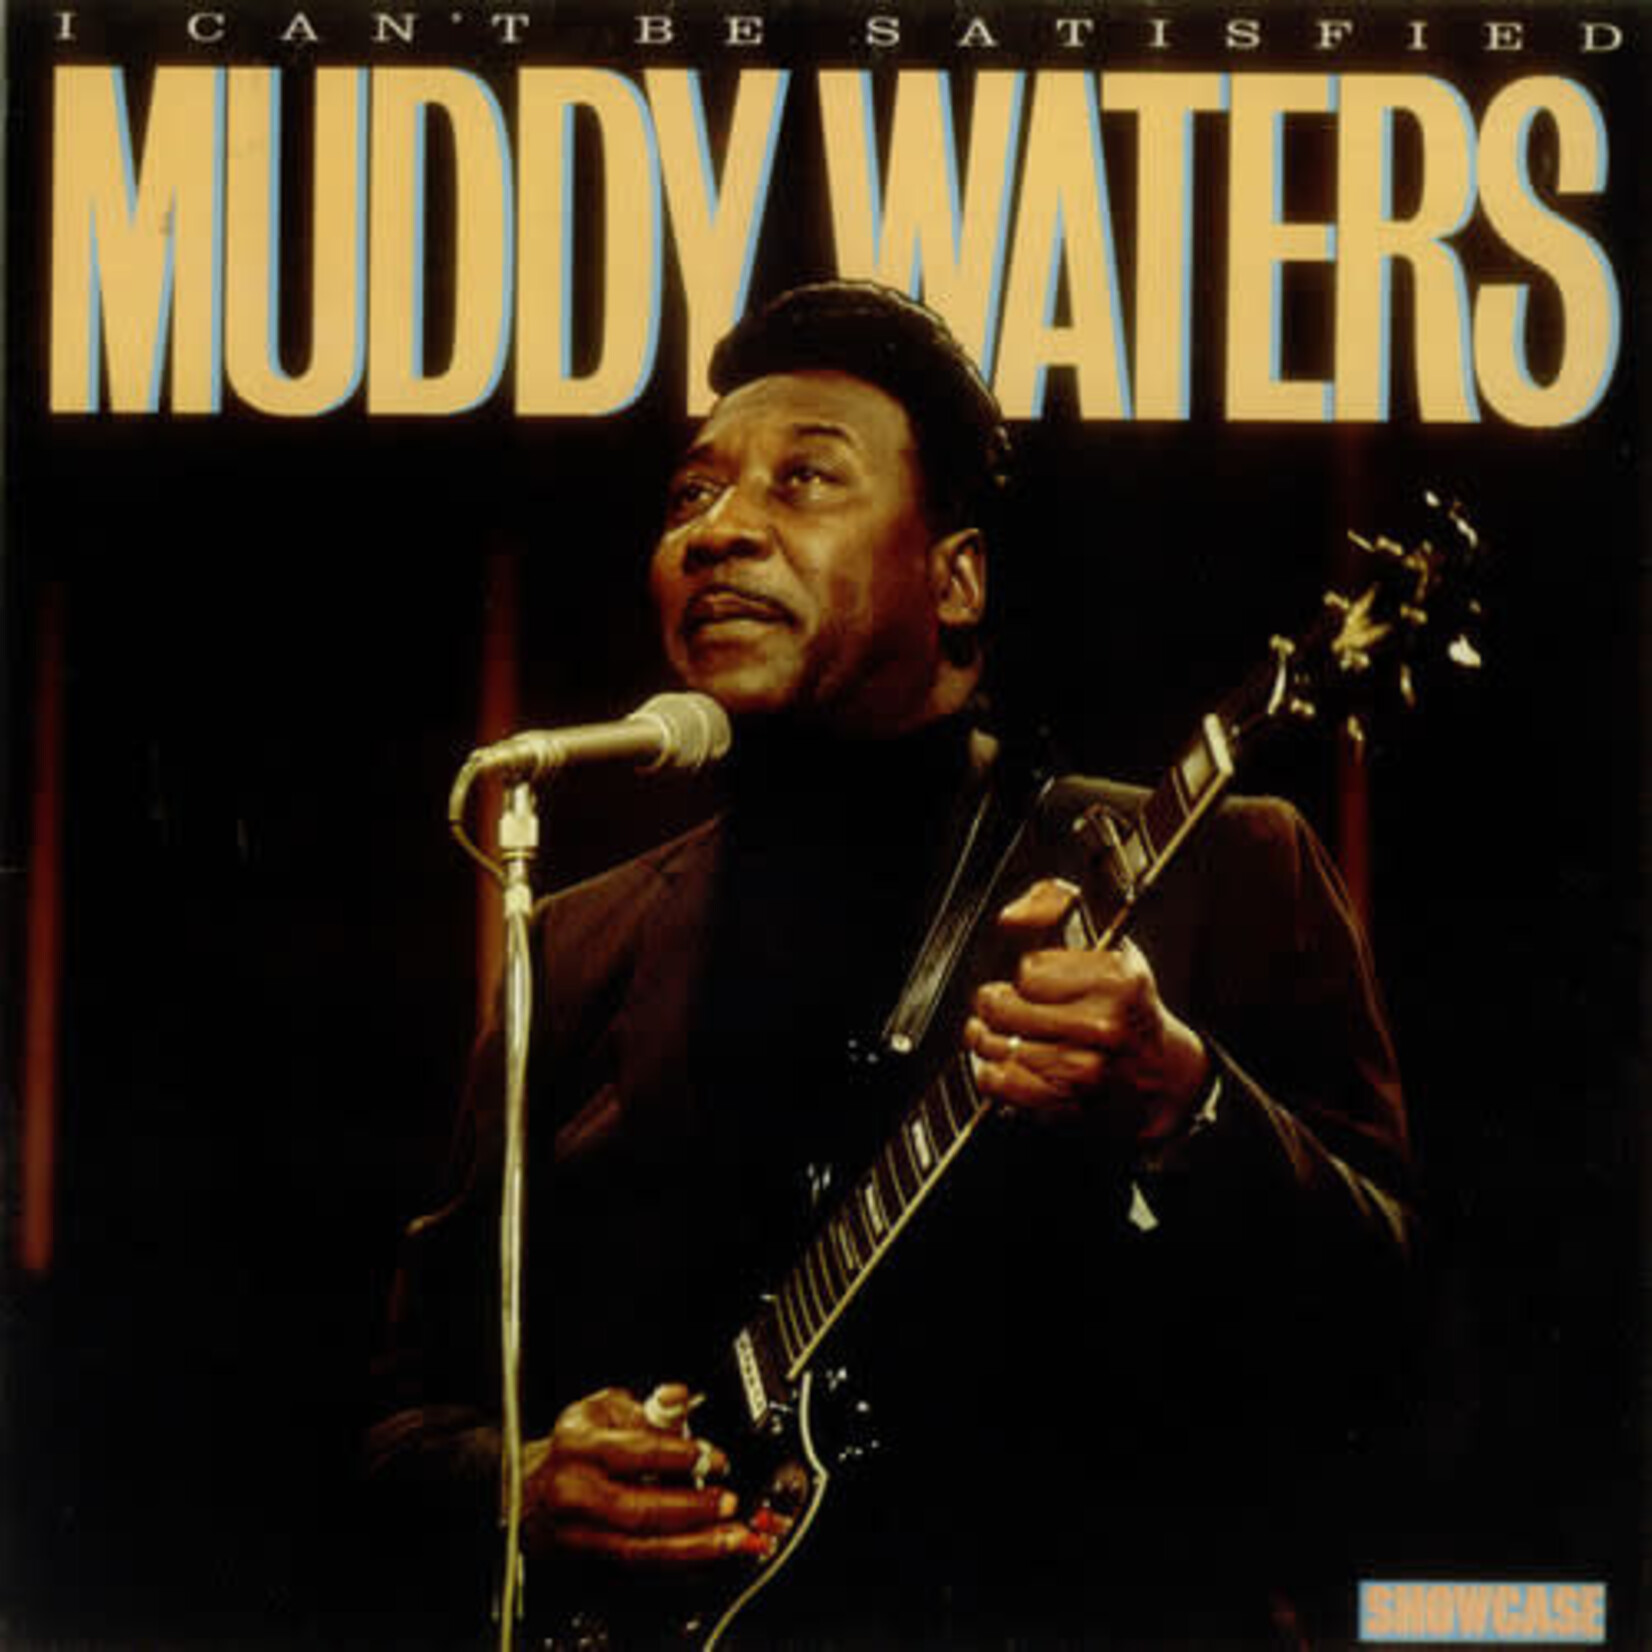 Muddy Waters – I Can't Be Satisfied